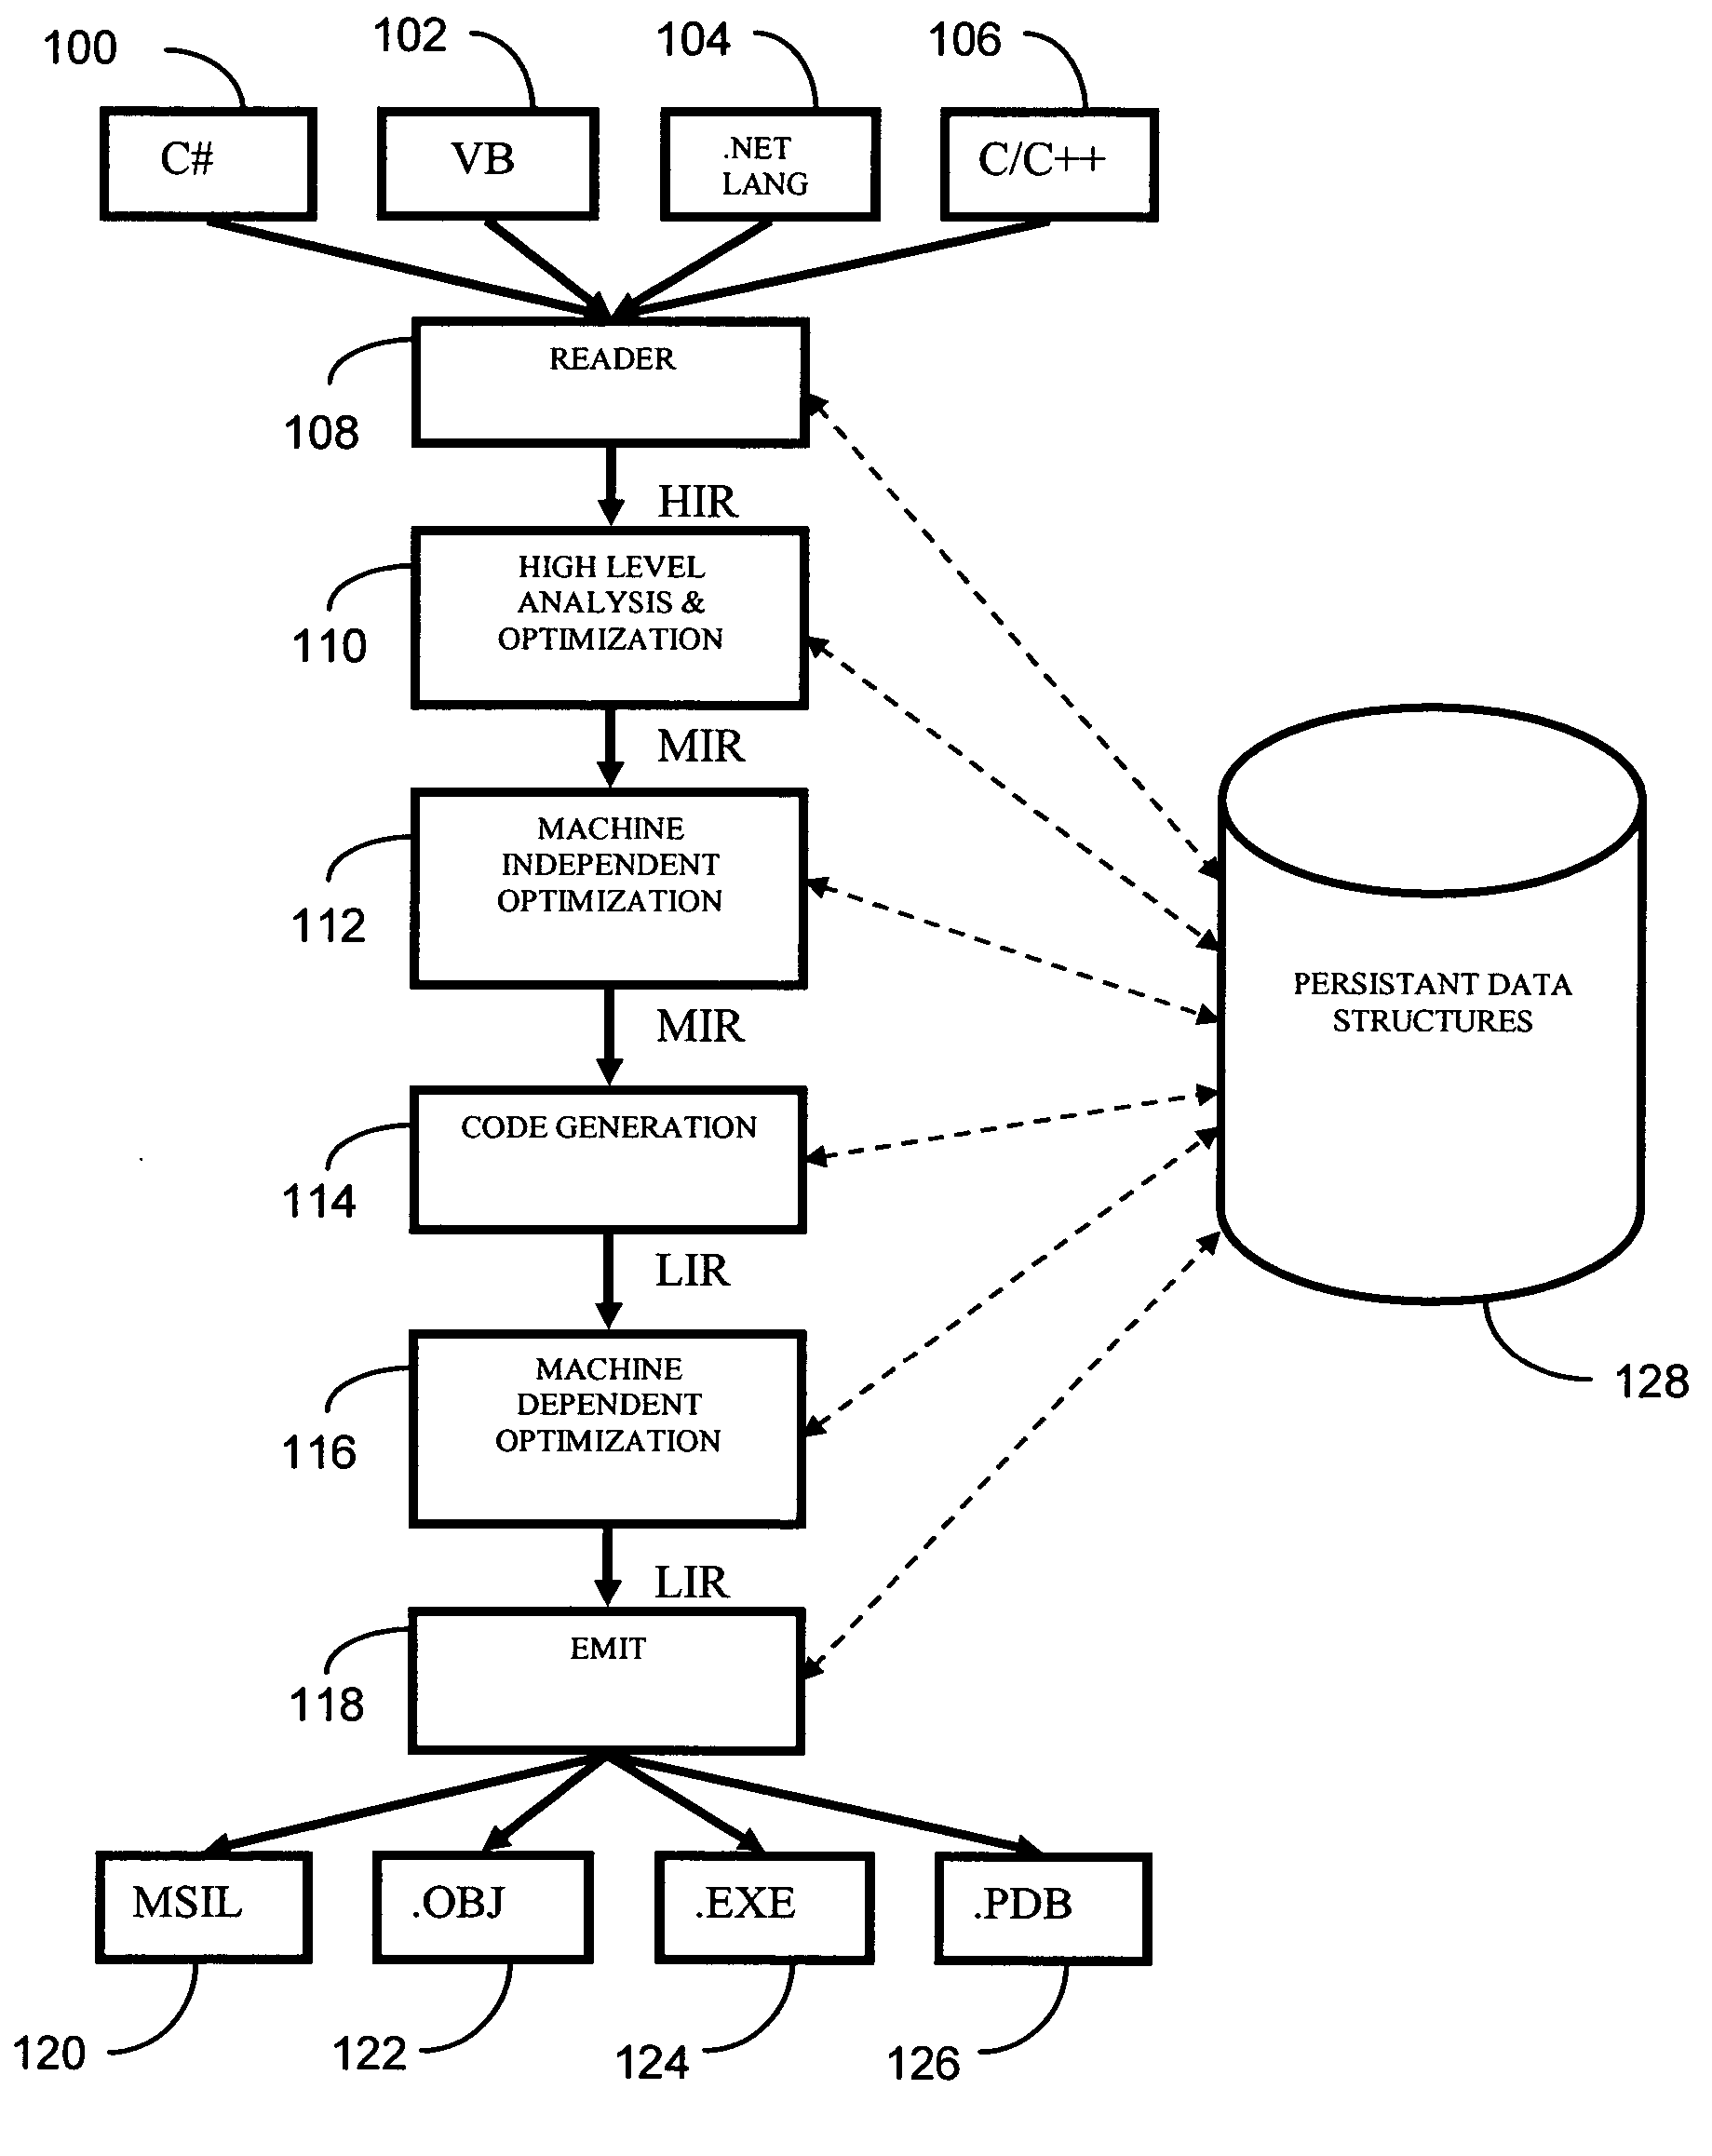 Type system for representing and checking consistency of heterogeneous program components during the process of compilation